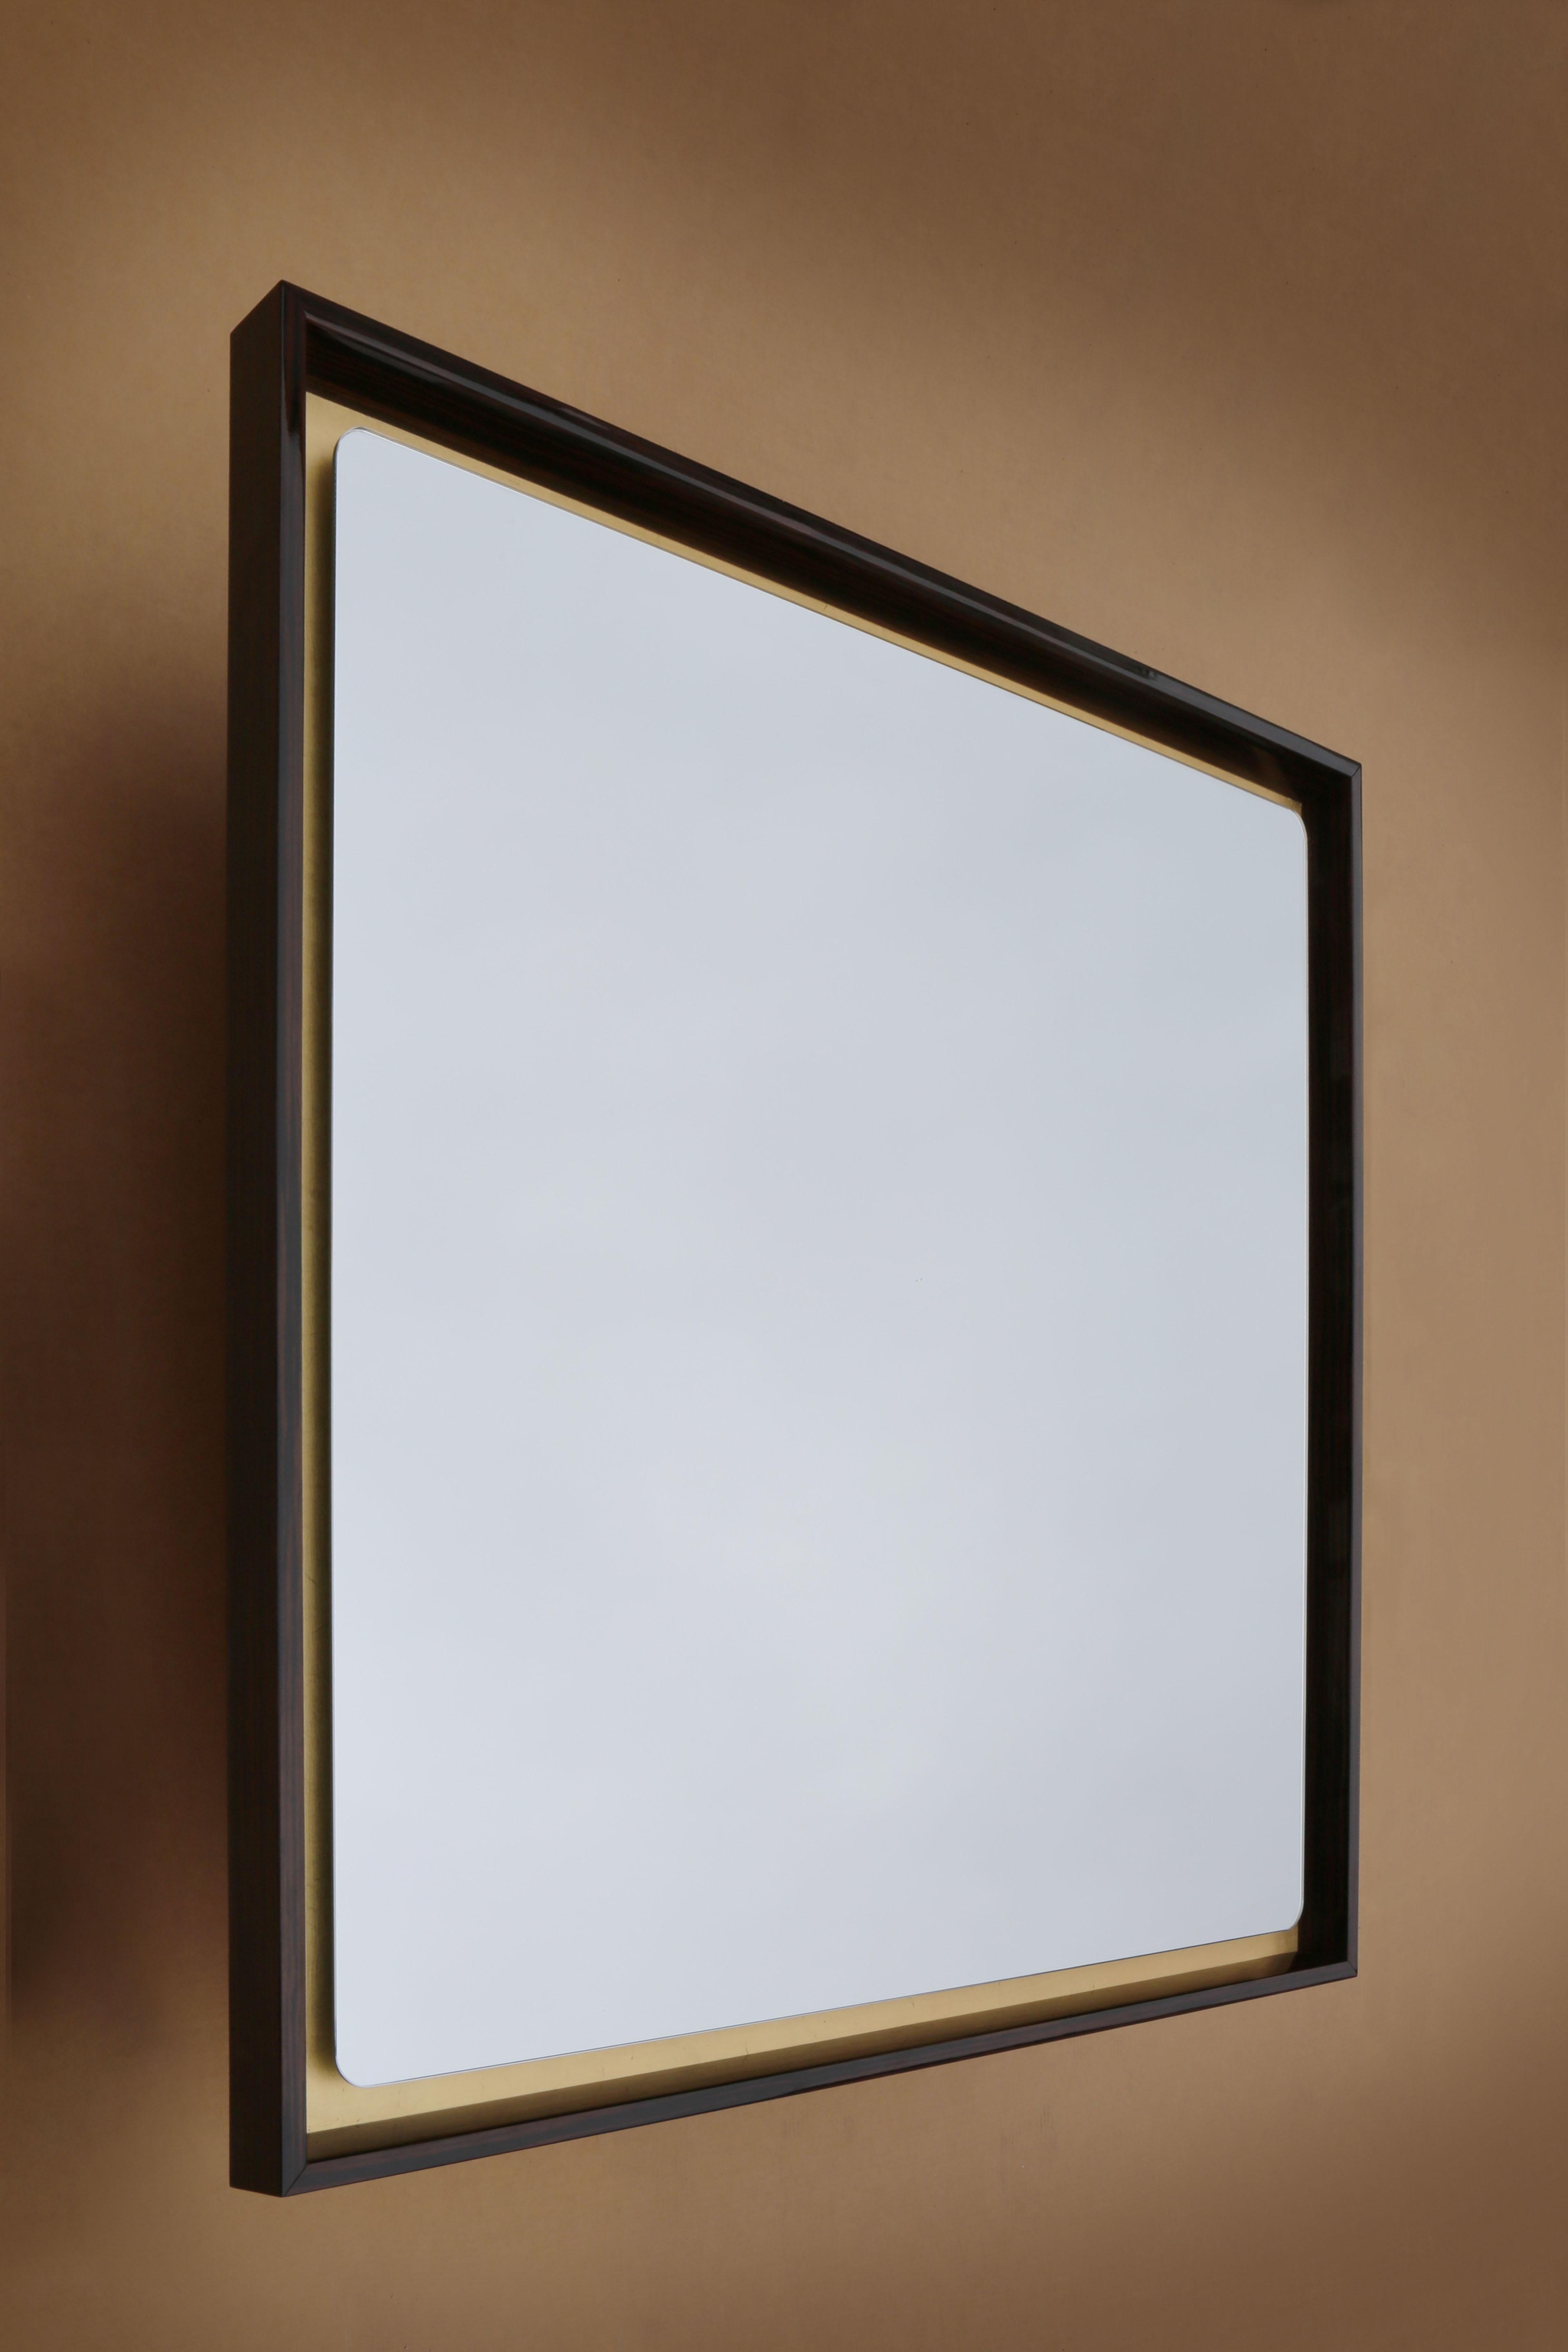 A wall mirror in a seemingly traditional style, but updated by the rounded corners of the glass floating above a background of gold leaf. The three-dimensionality of the piece is accentuated by the sharp formality of the faceted frame in Ebony or